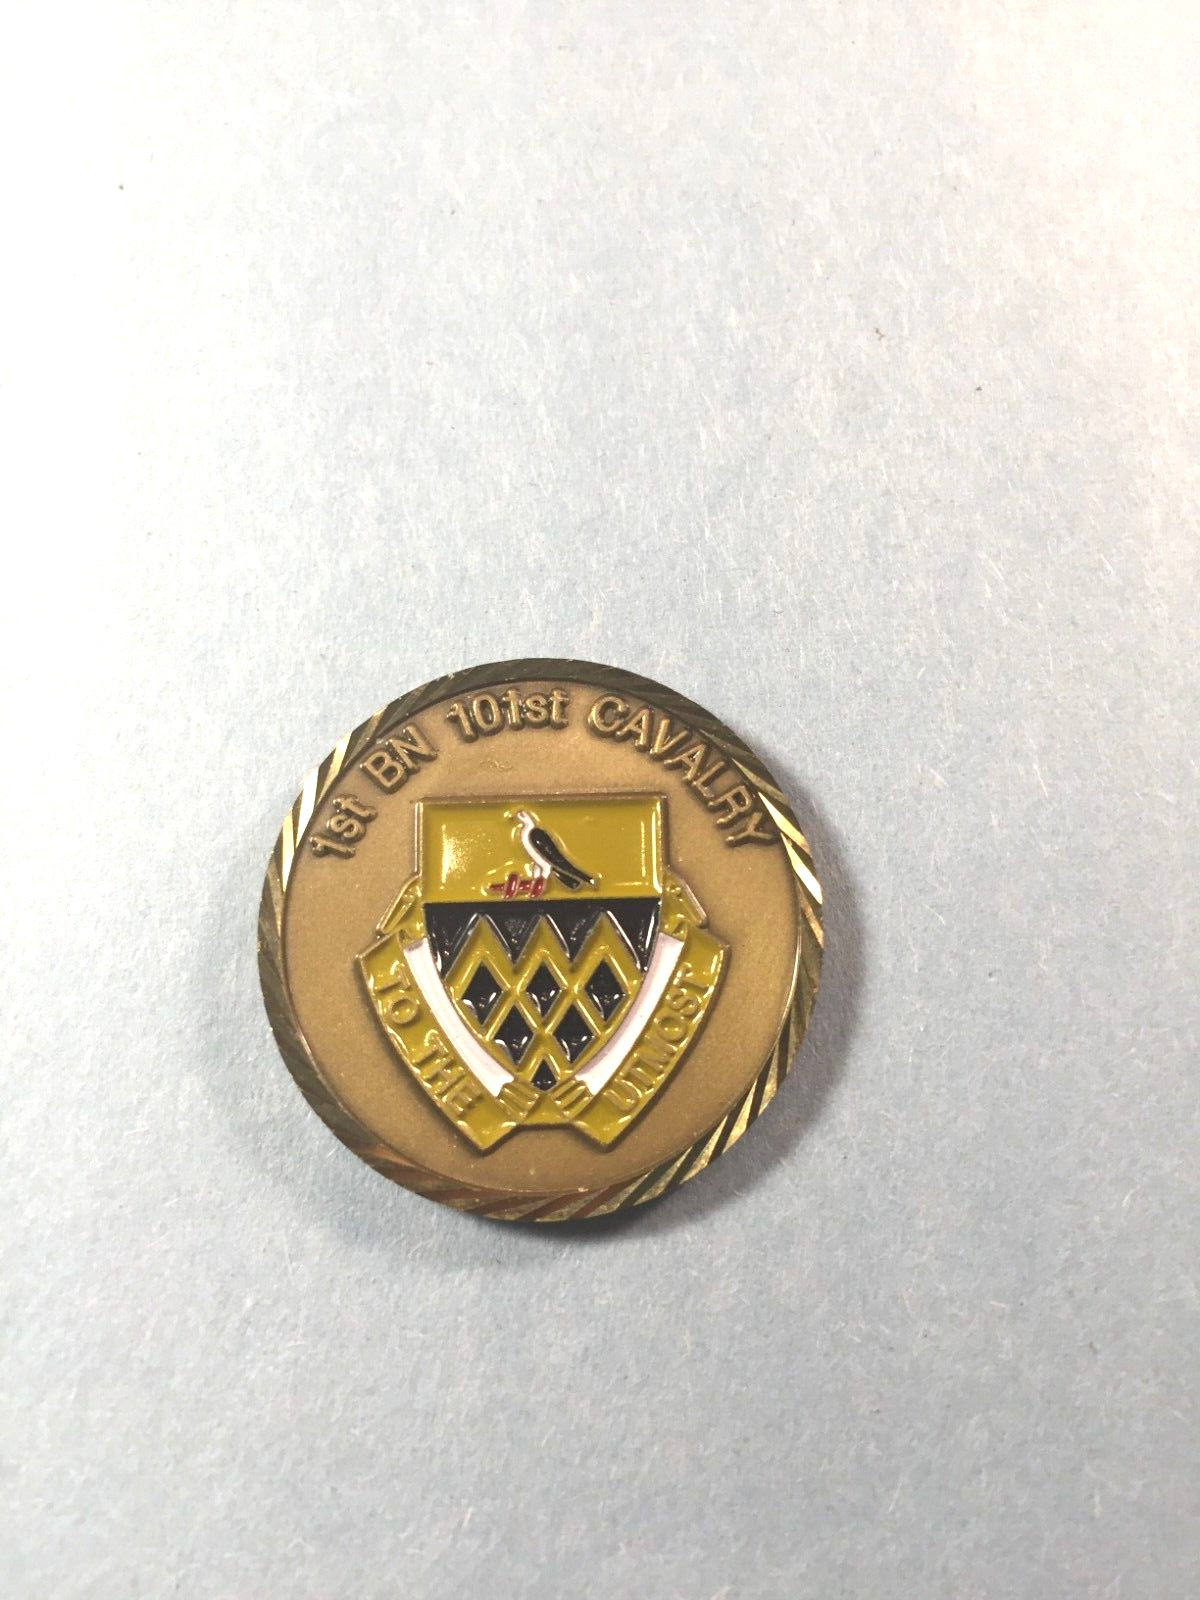 US Army Challenge Coin - 1st BN, 101st Cavalry